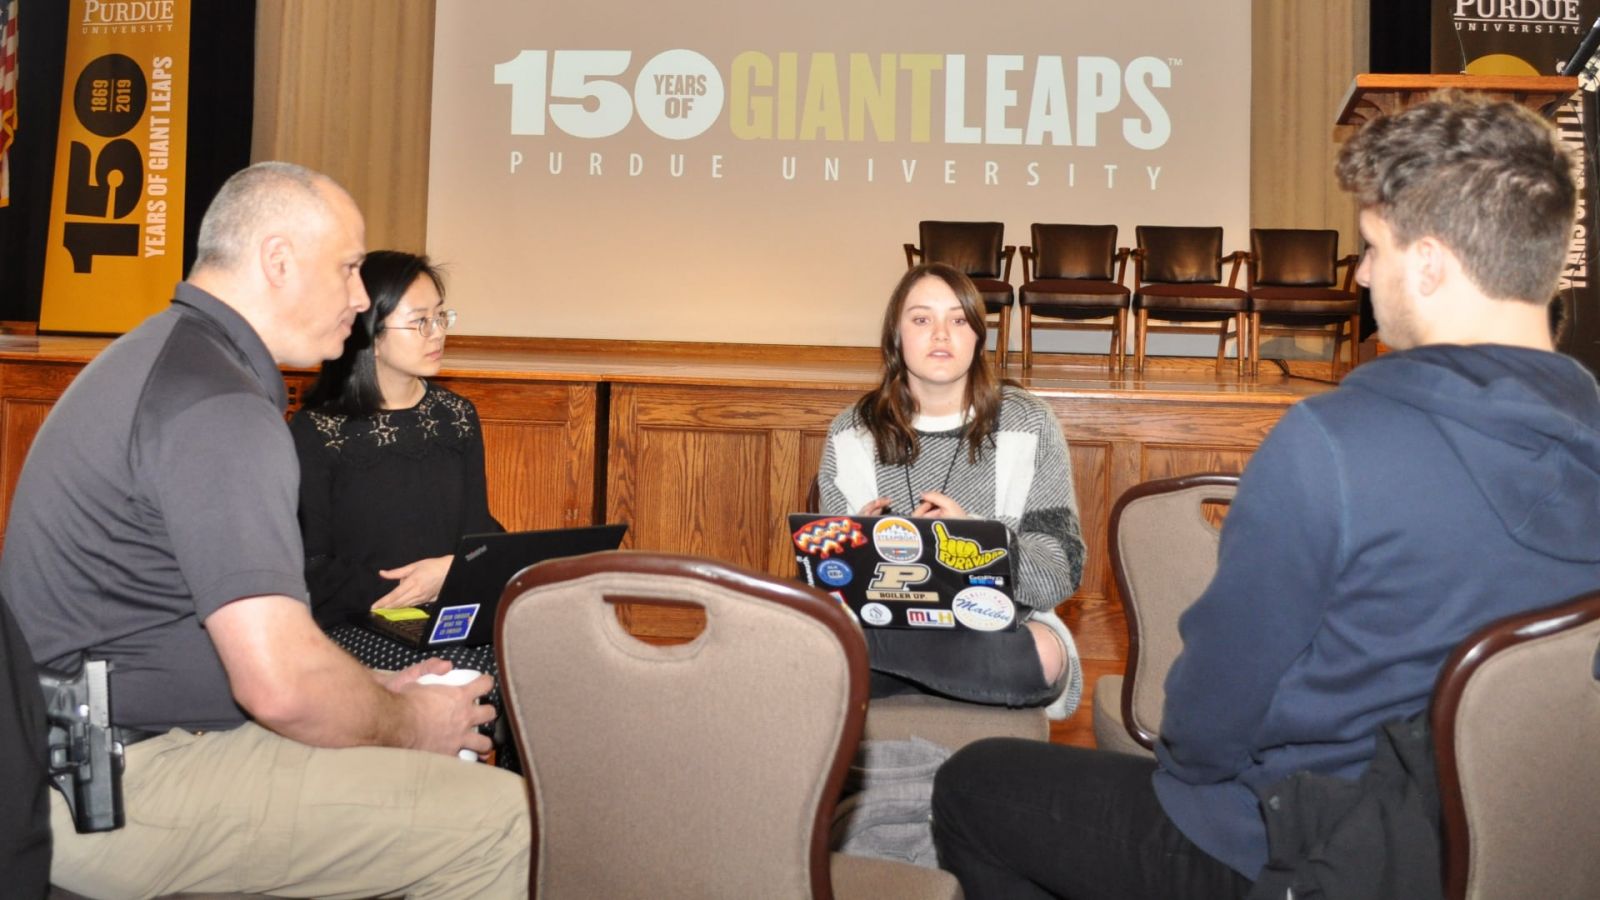 This team of students and their mentor, a local law enforcement officer, began their brainstorming session in the Purdue Memorial Union ballroom immediately following the human trafficking event presentations.